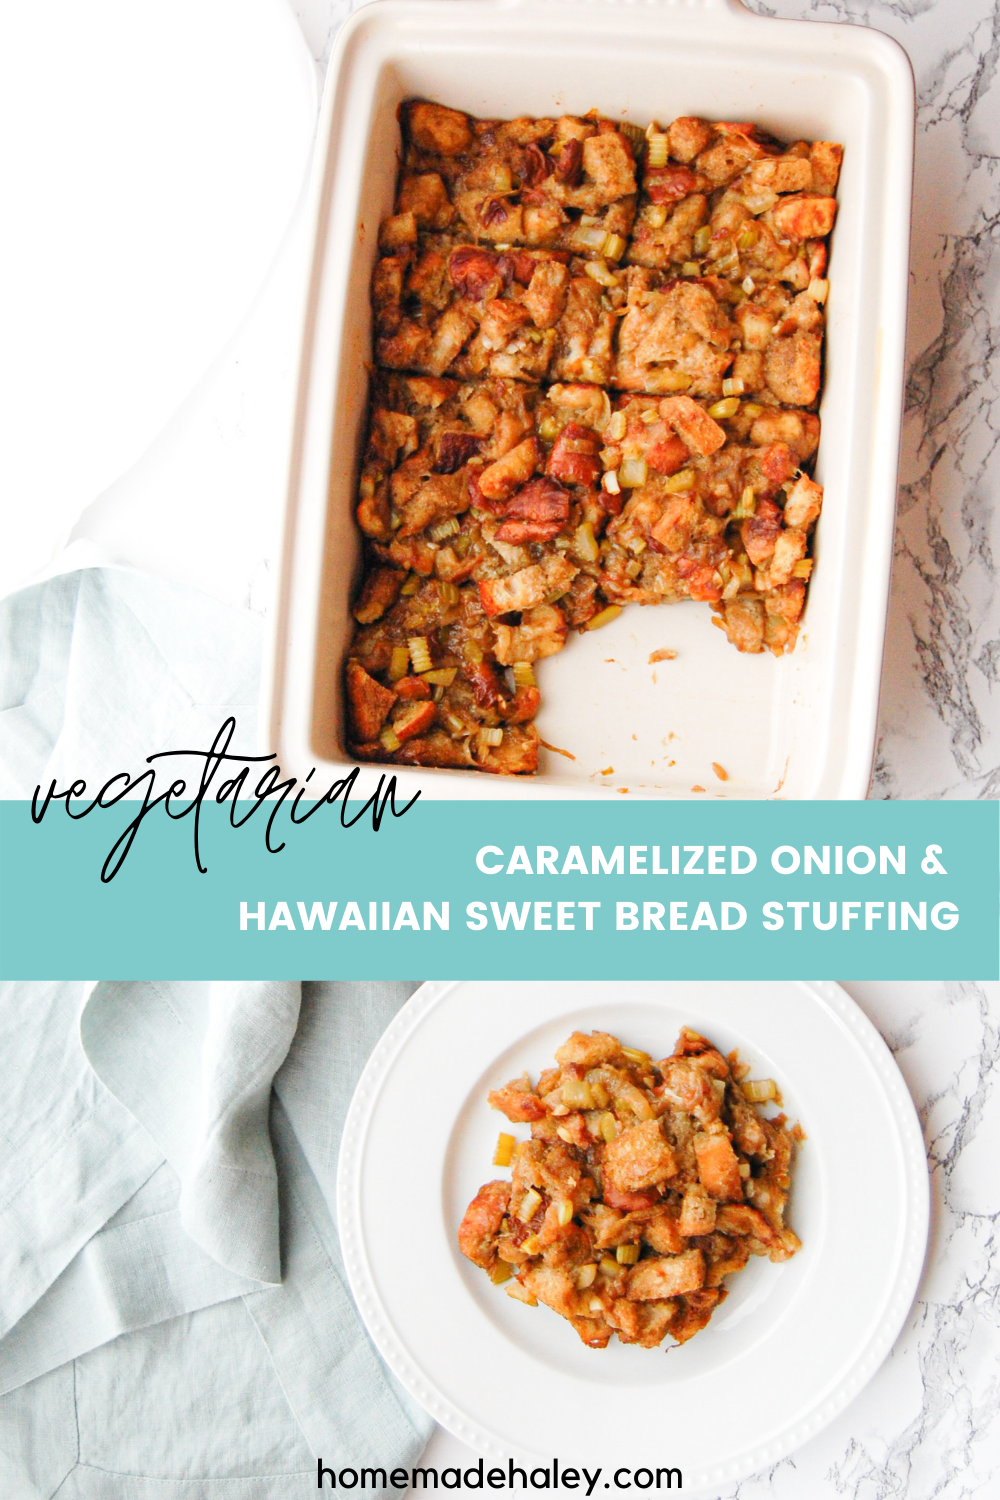 Whether you call it stuffing or dressing, no one will miss the meat in this simple and easy side dish! Vegetarian Caramelized Onion & Hawaiian Sweet Bread Stuffing has traditional flavors, yet brings a unique flair!